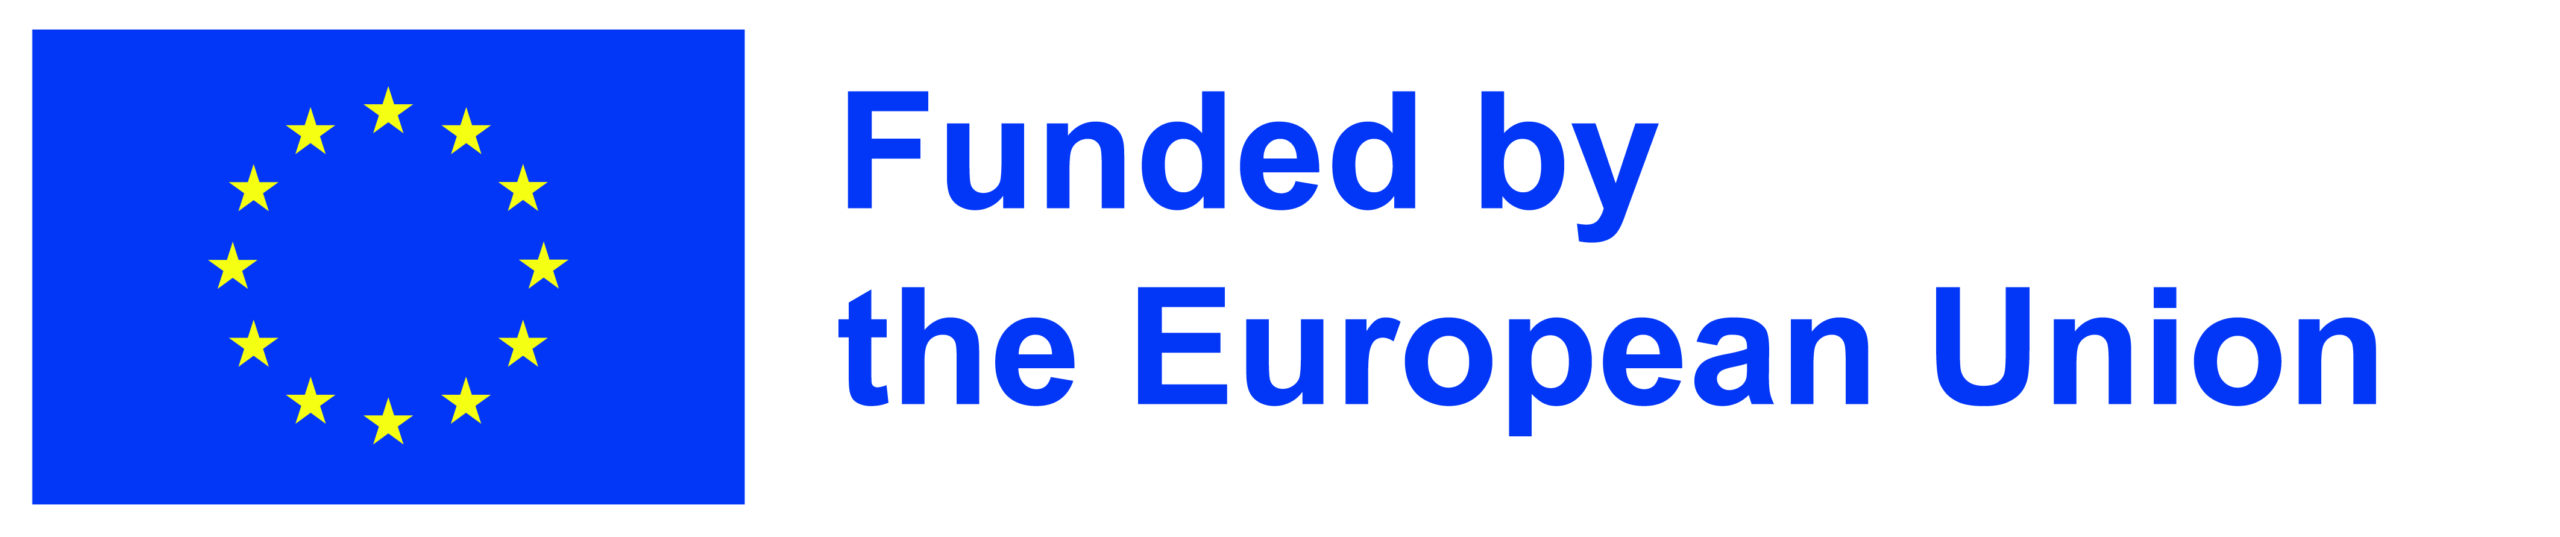 This project has received funding from the European Union’s Horizon Europe research and innovation funding programme under Grant Agreement No 101112708. Global grant: 6 999 461.25 euros. Grant for ITENE: 357 843.75 euros.